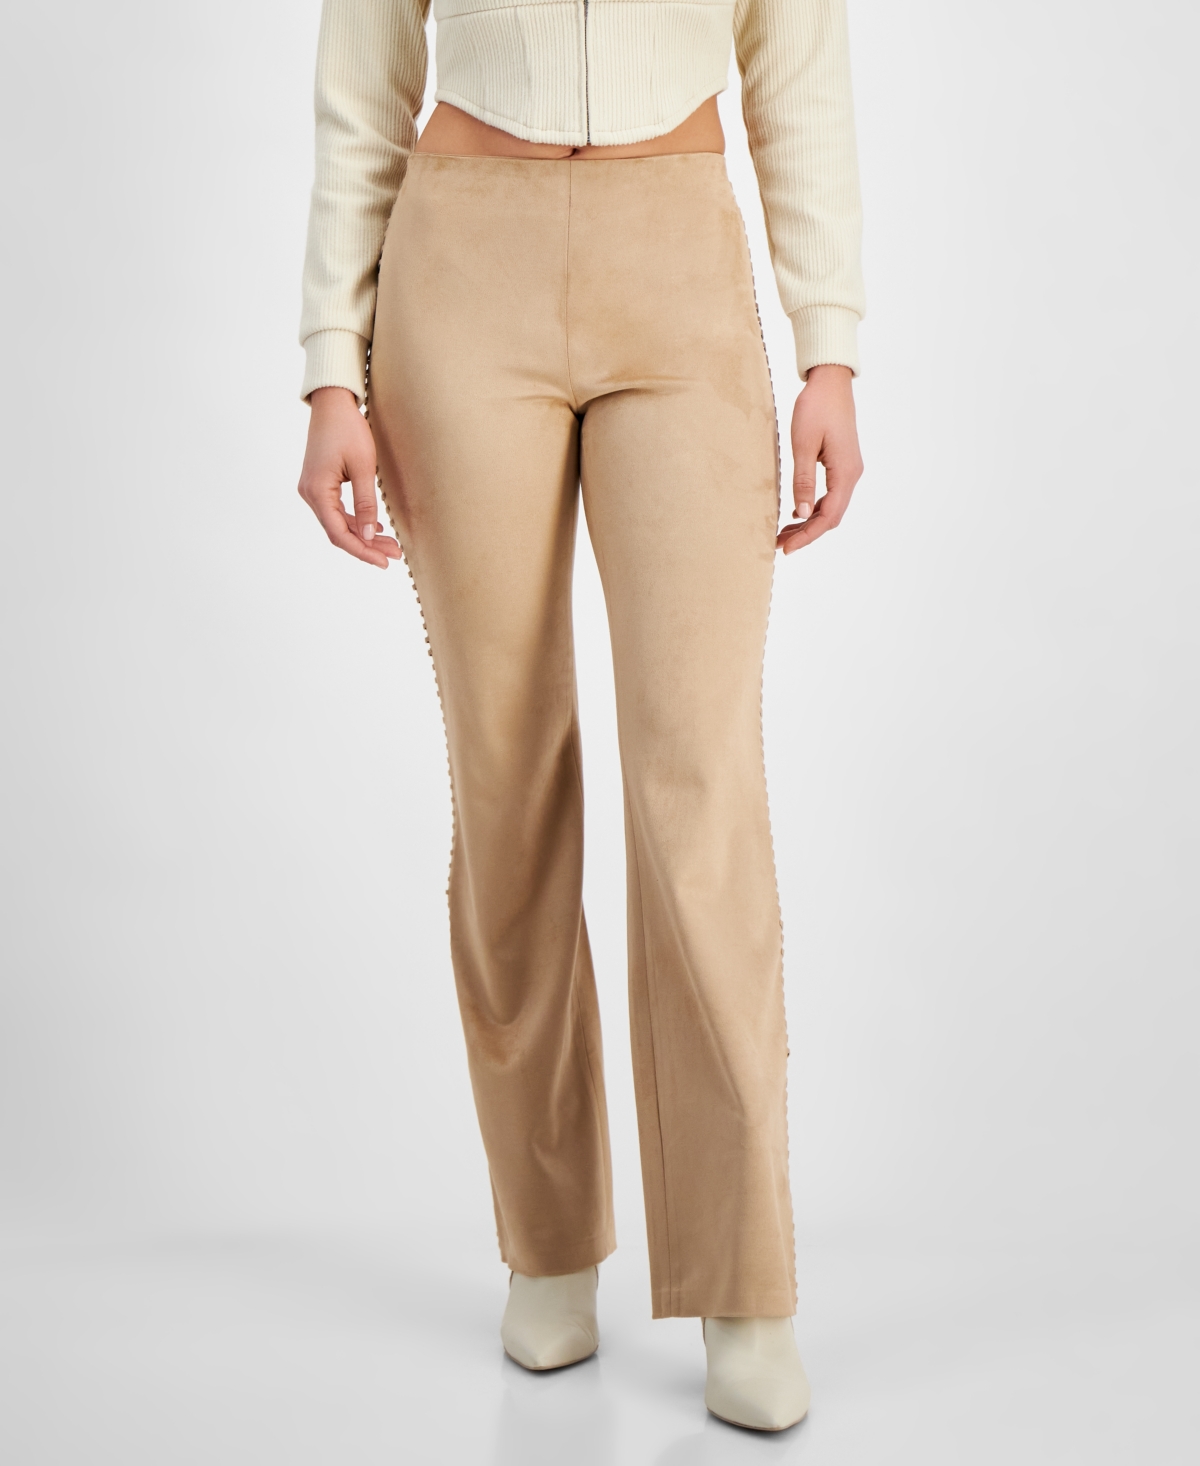 Guess Women's Ornella Faux-suede Whipstitched Pants In Wet Sand